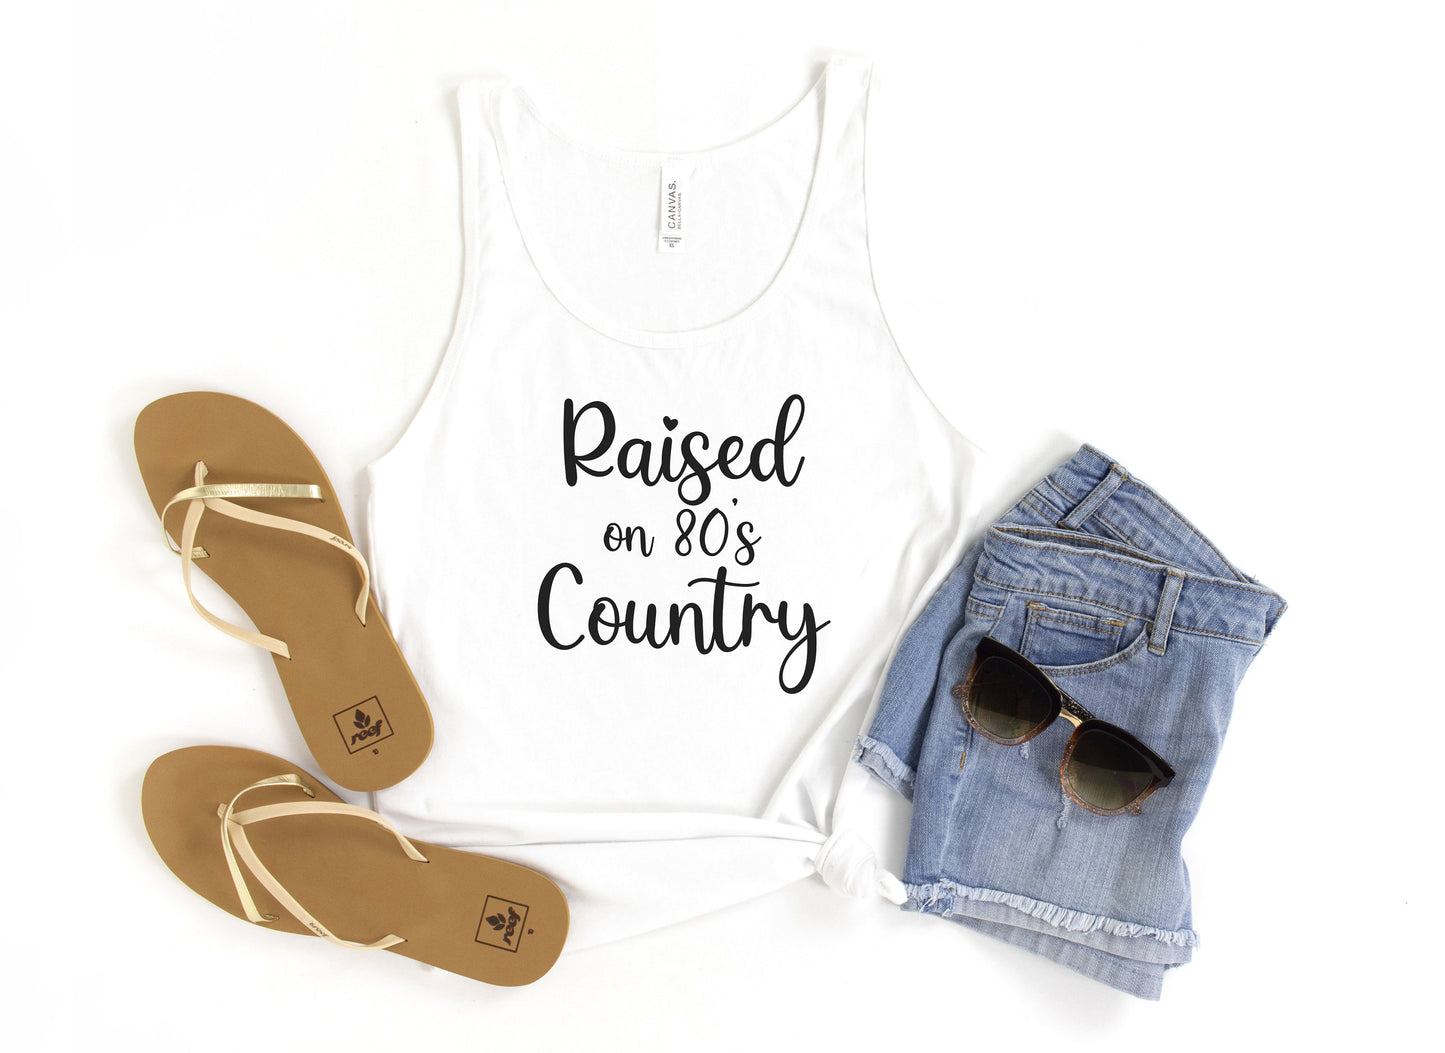 Raised on 80's Country Tank Top